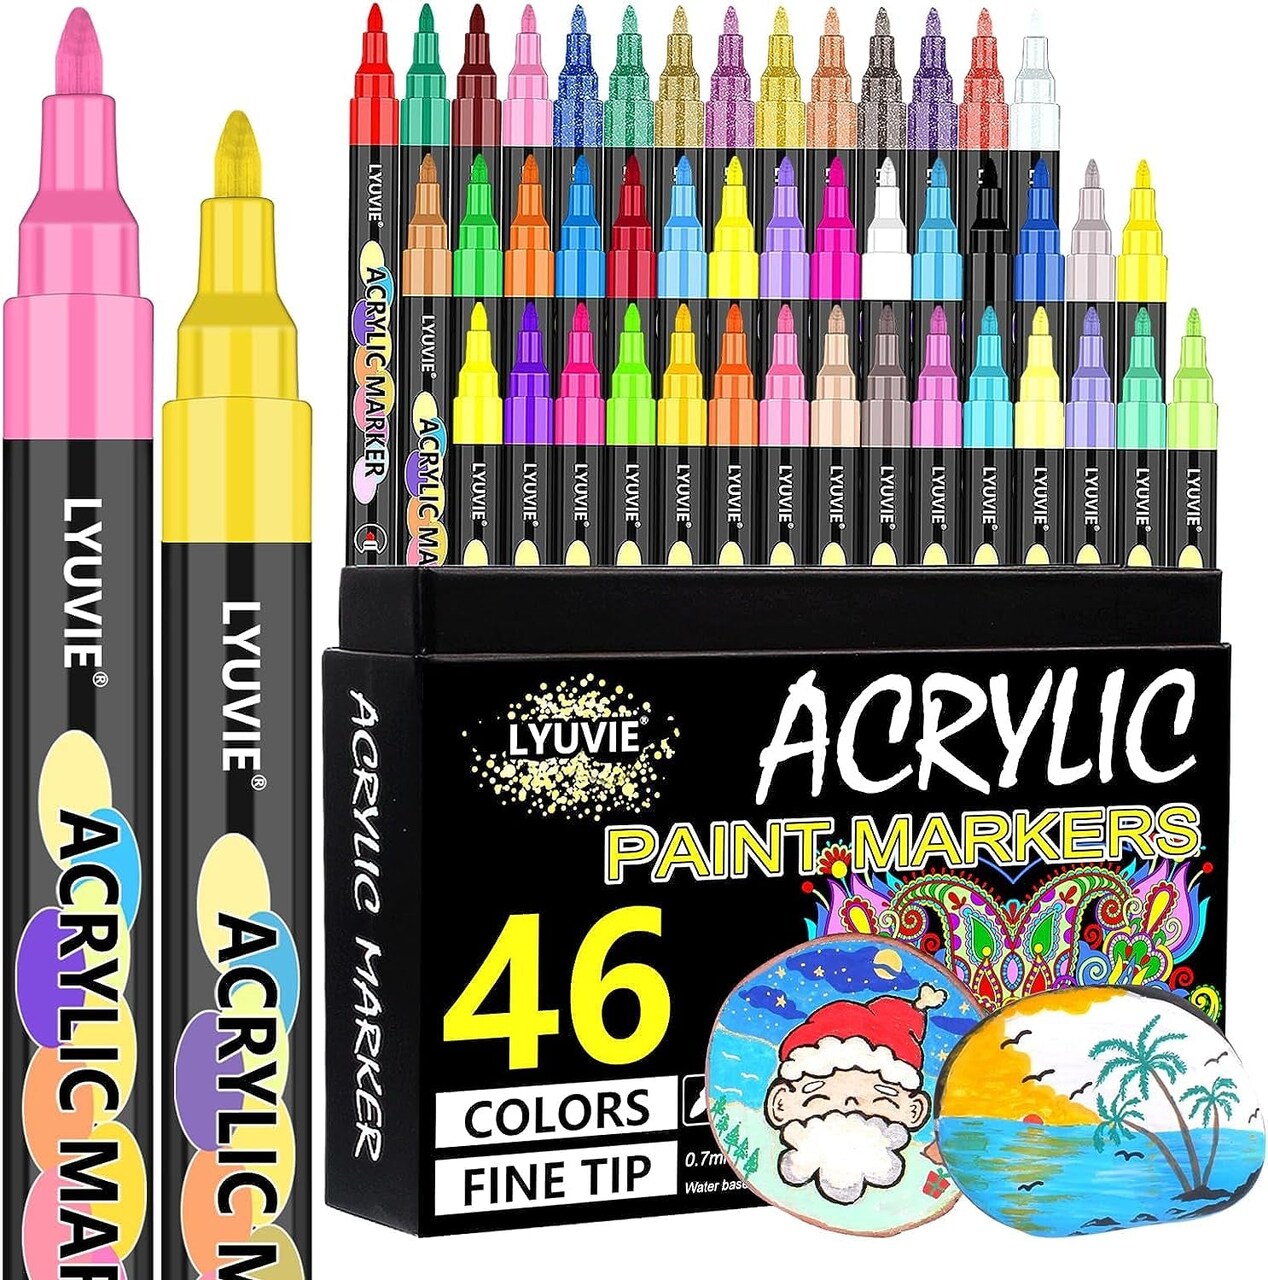 46 Colors Acrylic Paint Pens, Extra Fine Tip Acrylic Paint Markers for Rock  Painting Ceramic Stone Wood Canvas DIY Crafts Card Making